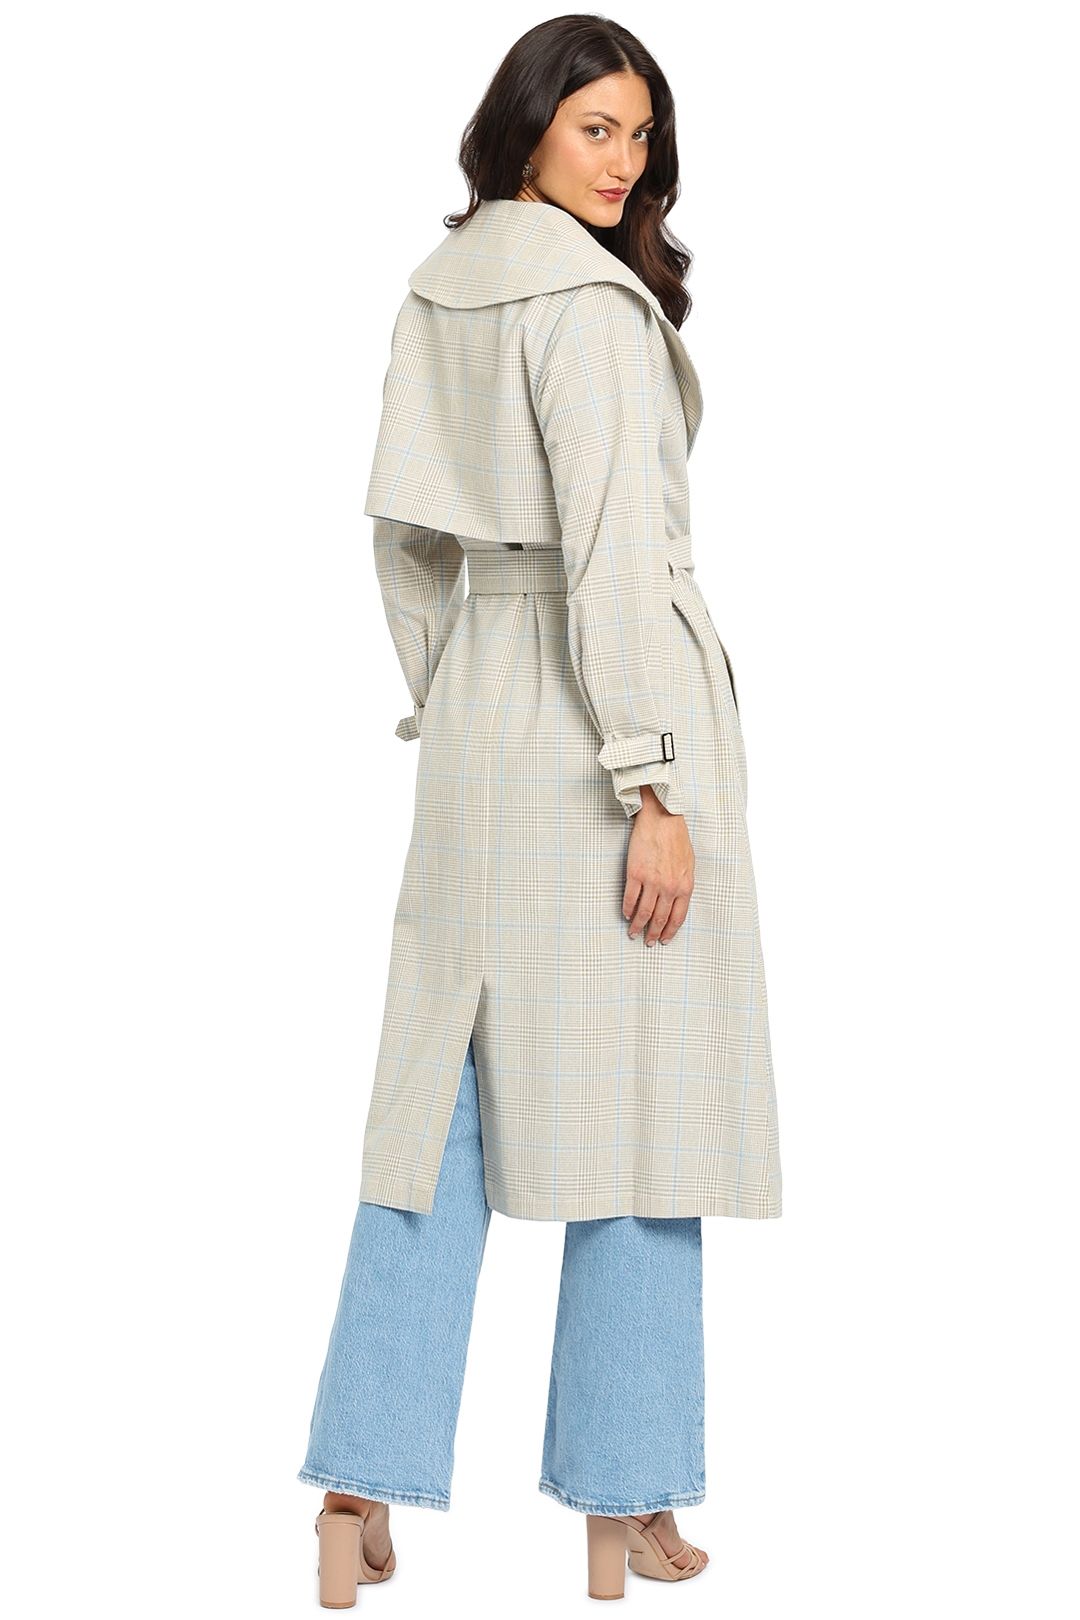 Staple The Label Margo Trench Coat Long Sleeves